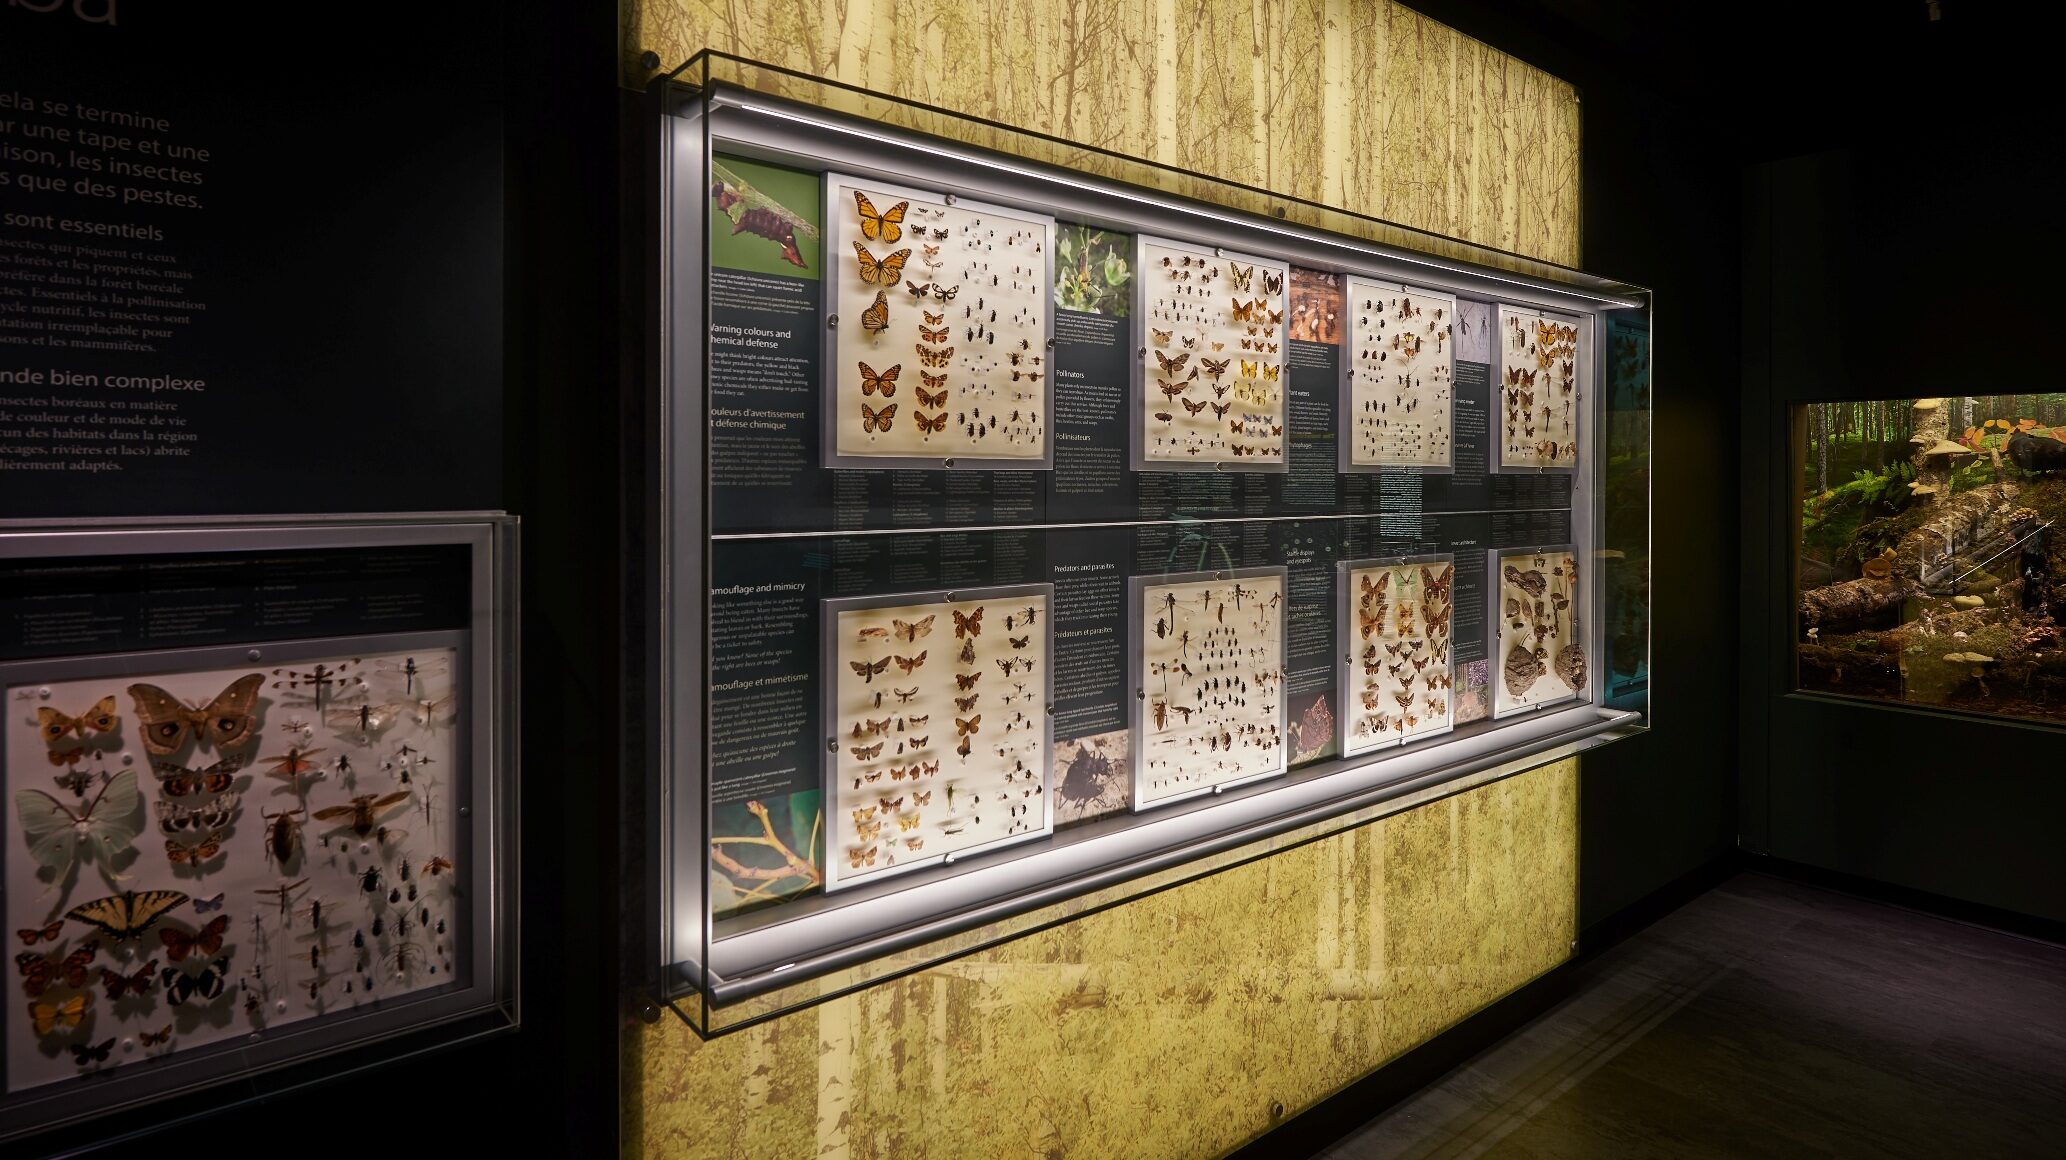 Looking down a corridor at a glass display wall of pinned insects.